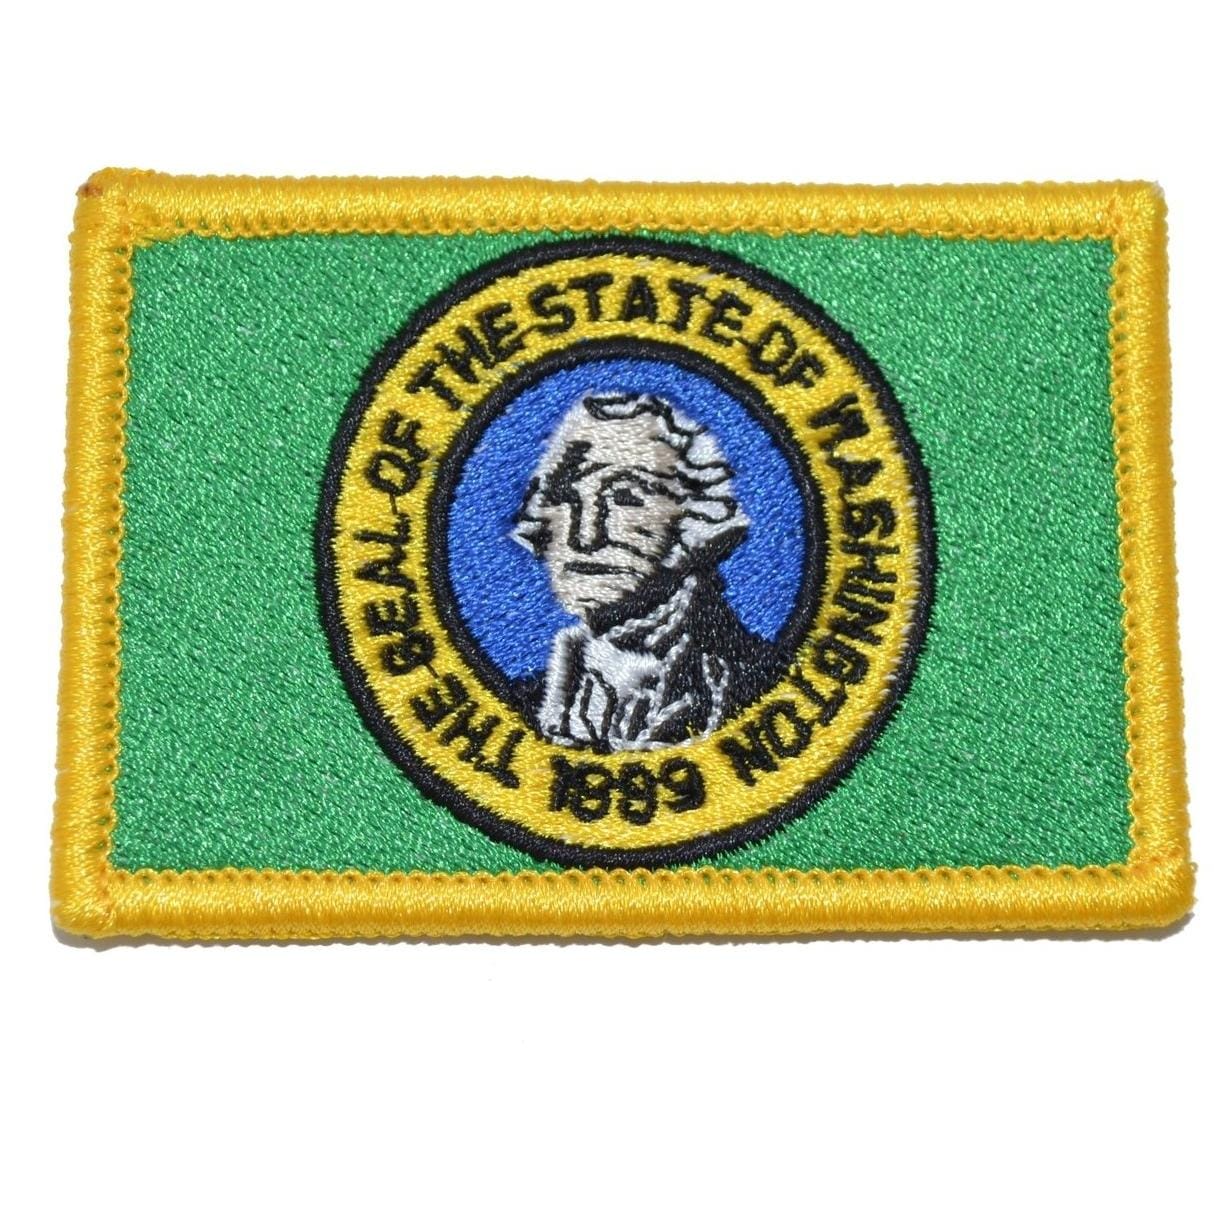 Tactical Gear Junkie Patches Full Color Washington State Flag - 2x3 Patch